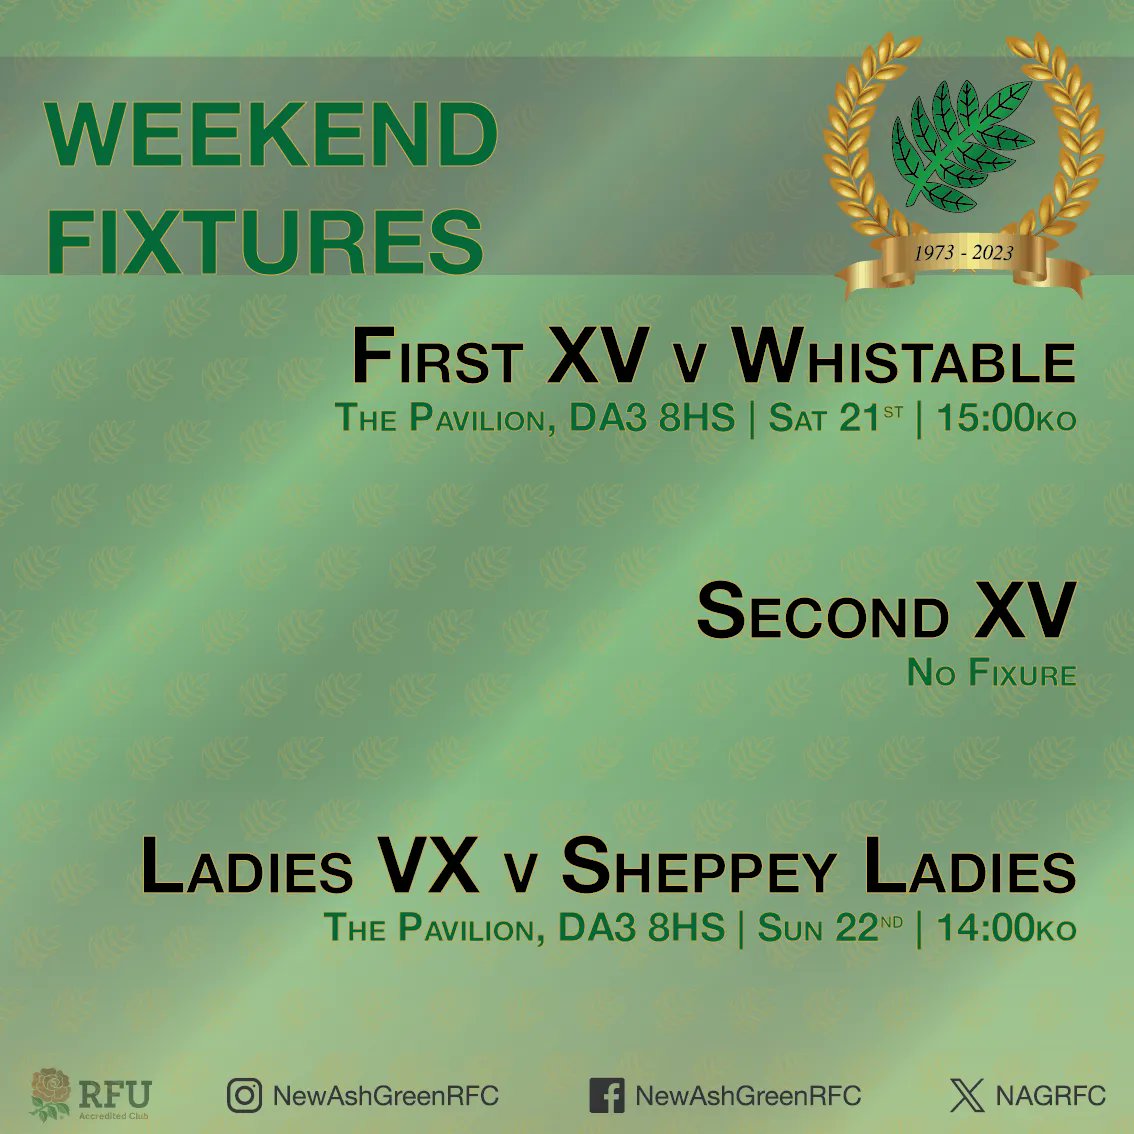 All change from last weekend, the 1XV and Ladies teams in action with the 2XV having a break. Both games at home, Saturday sees the 1XV welcome @Whitstable_RFC, and Sunday sees @SheppeyRFC_1892 Ladies travel to New Ash Green!